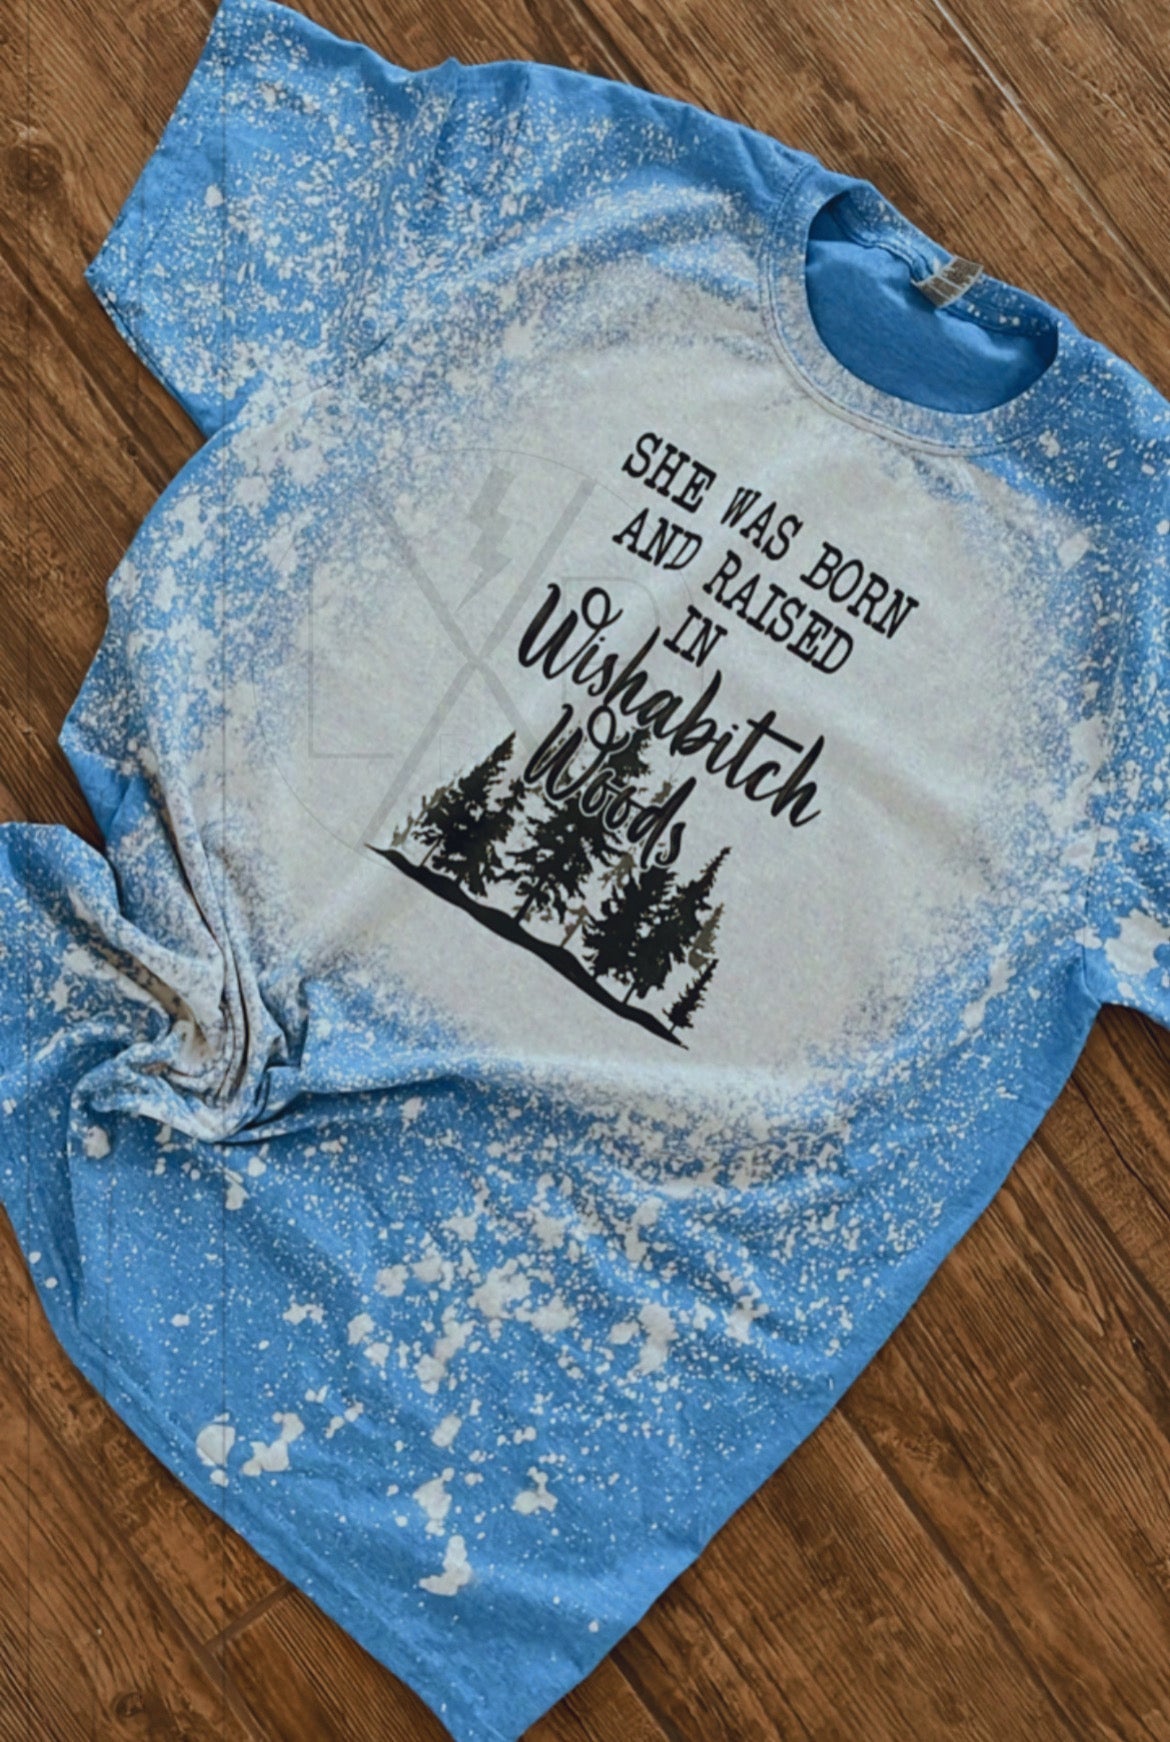 Born and raised in wishabit*h would bleached shirt